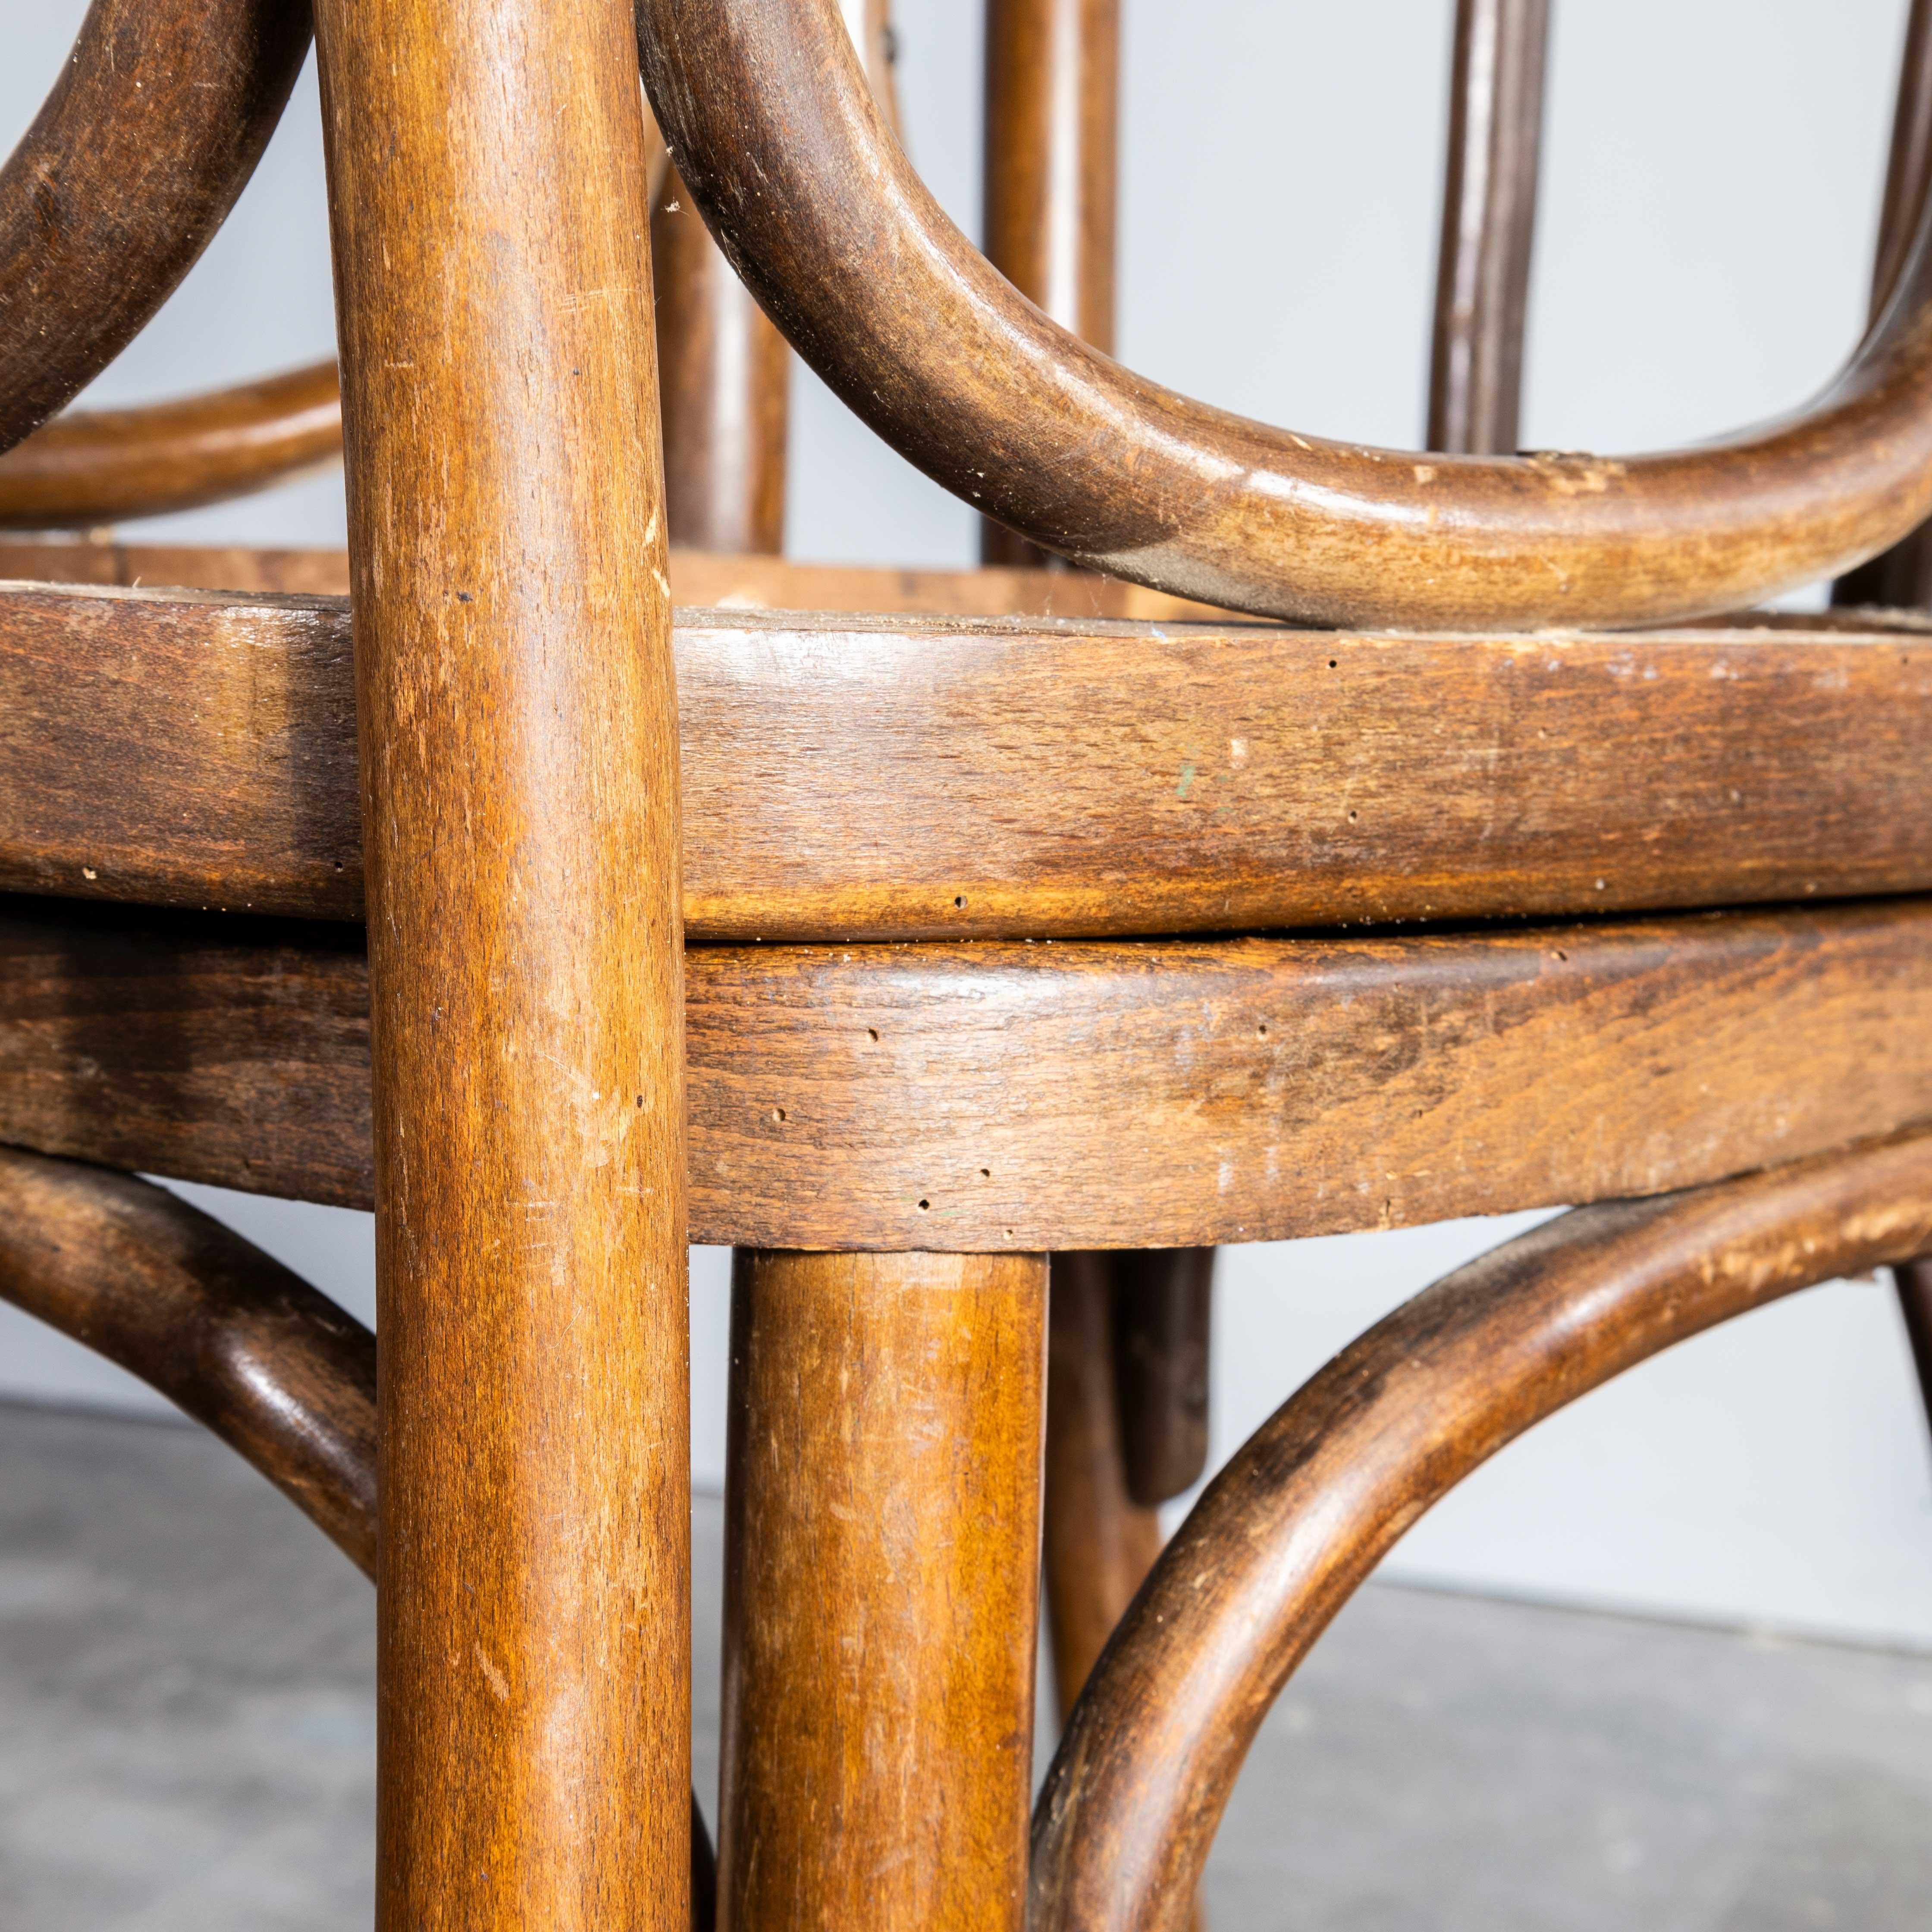 1920’s Classic Bentwood Dining Chairs – Austrian – Pair
1920’s Classic Bentwood Dining Chairs – Austrian – Pair. Founded in the early 19th Century by Michael Thonet, Thonet invented the process of steam bending wood under pressure and used this to